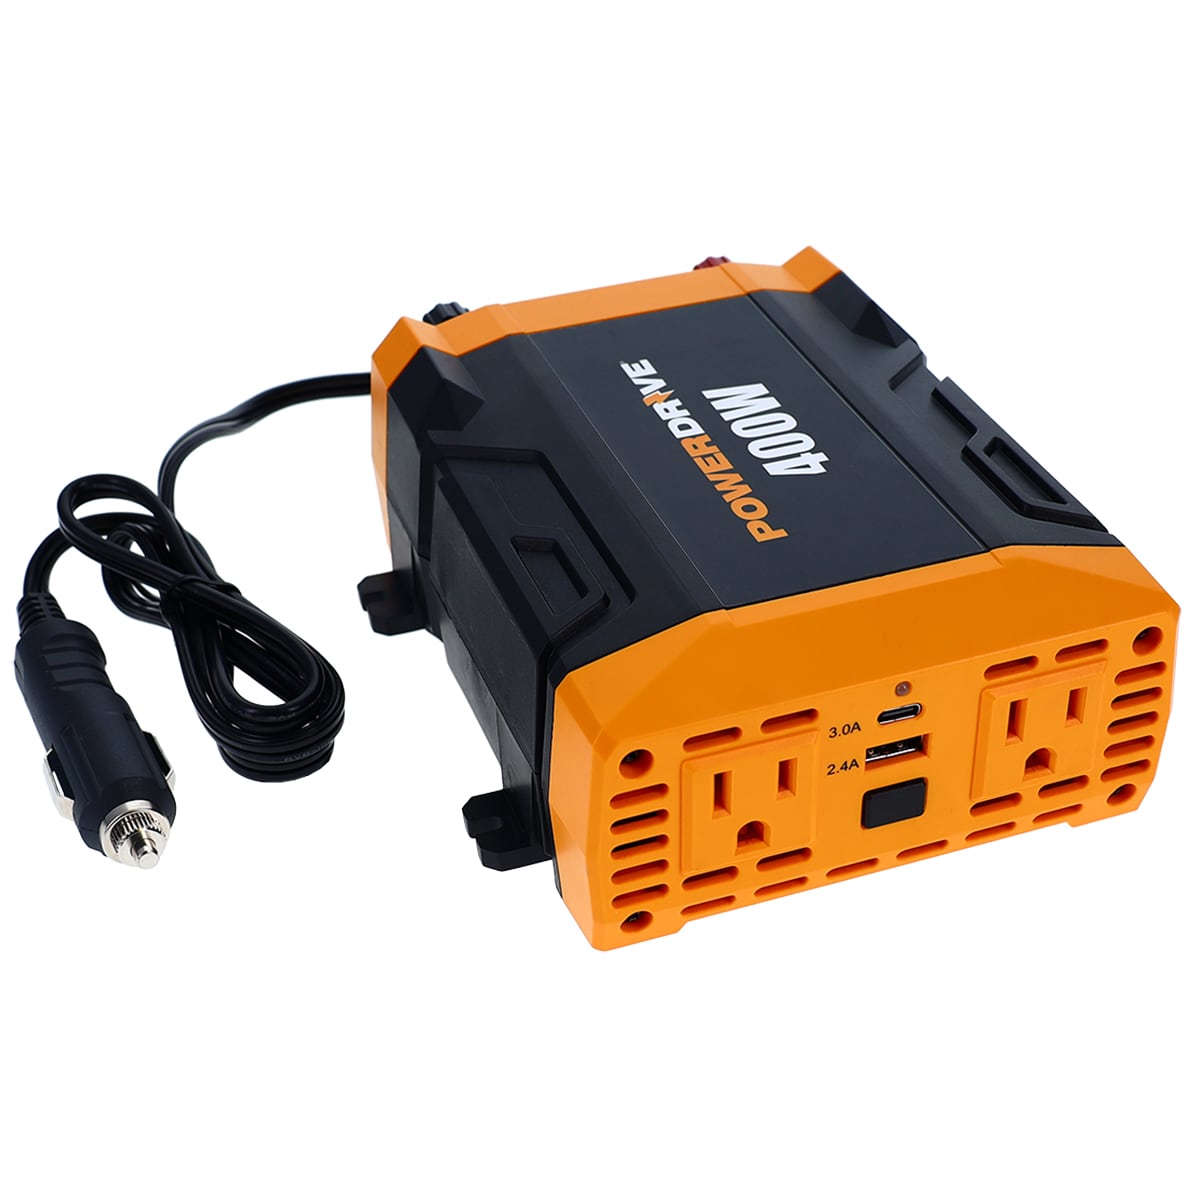 PowerDrive 400W Power Inverter with 4 Outlets - Charge Devices on the Go, Dual USB Ports